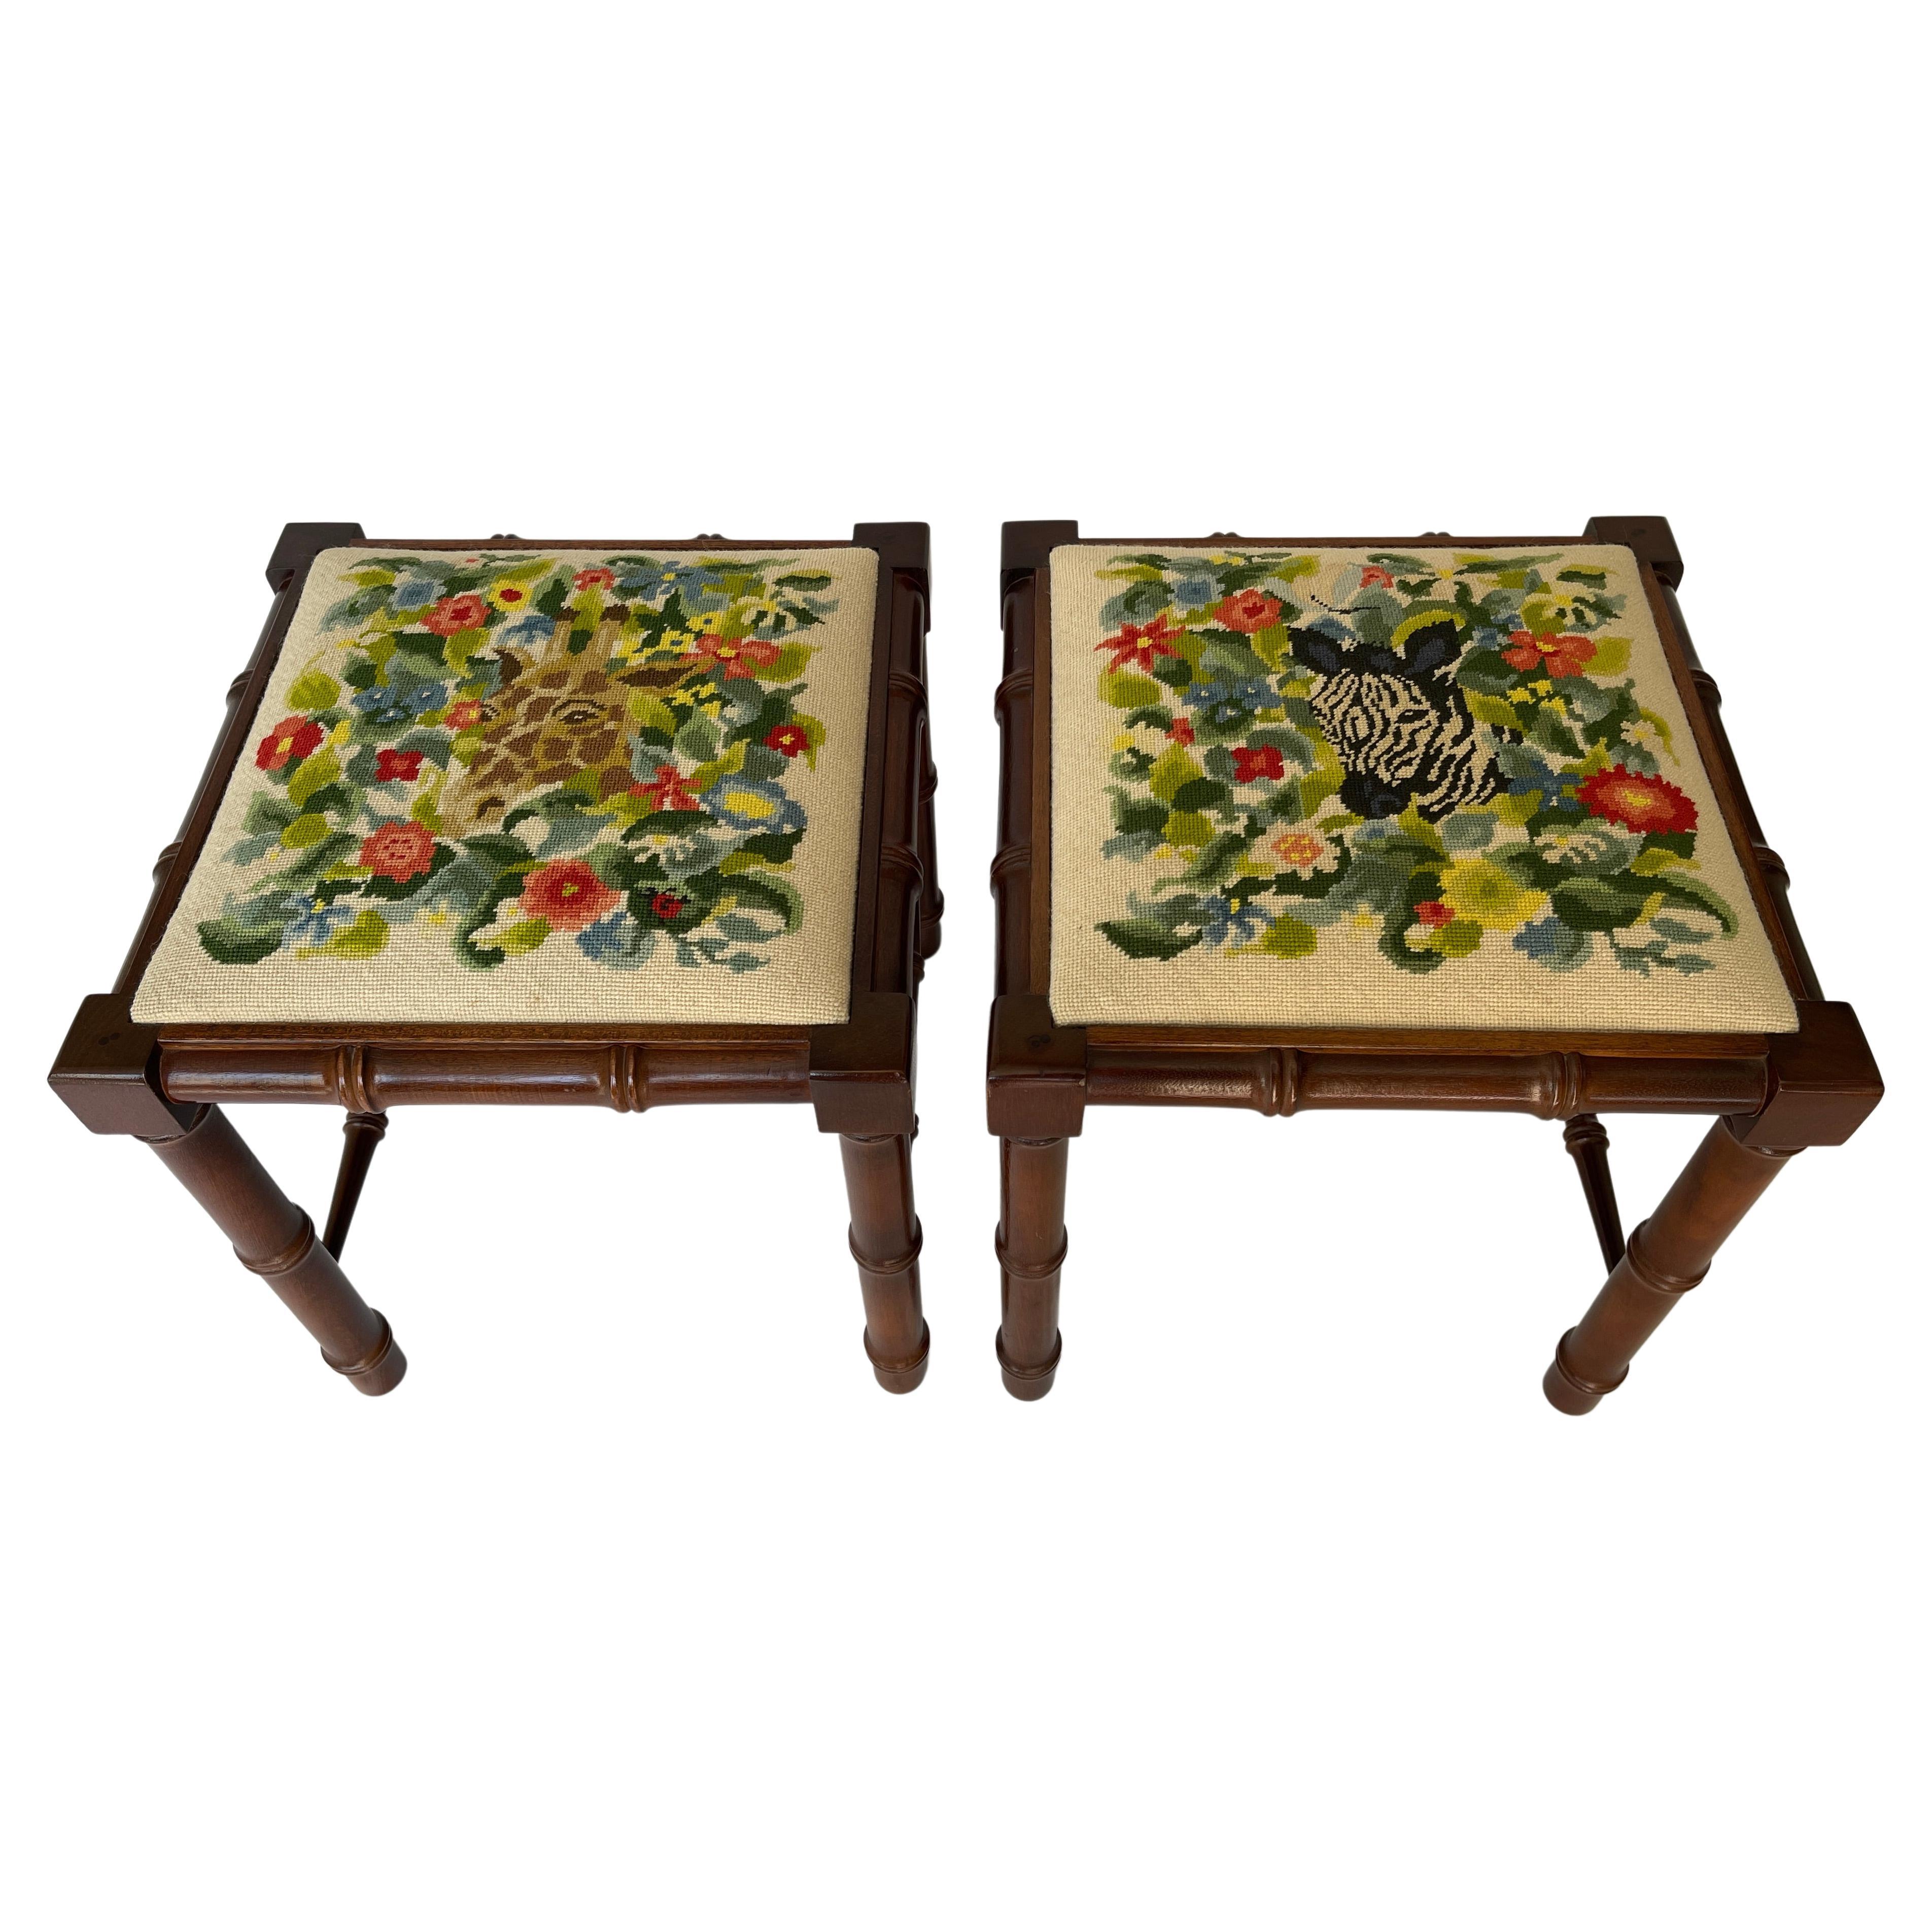 Pair of walnut faux bamboo ottoman / stools upholstered with hand stitched needlepoint Zebra surrounded by flowers on one, and a Giraffe on the other.
c. 1970's, North Carolina, USA.